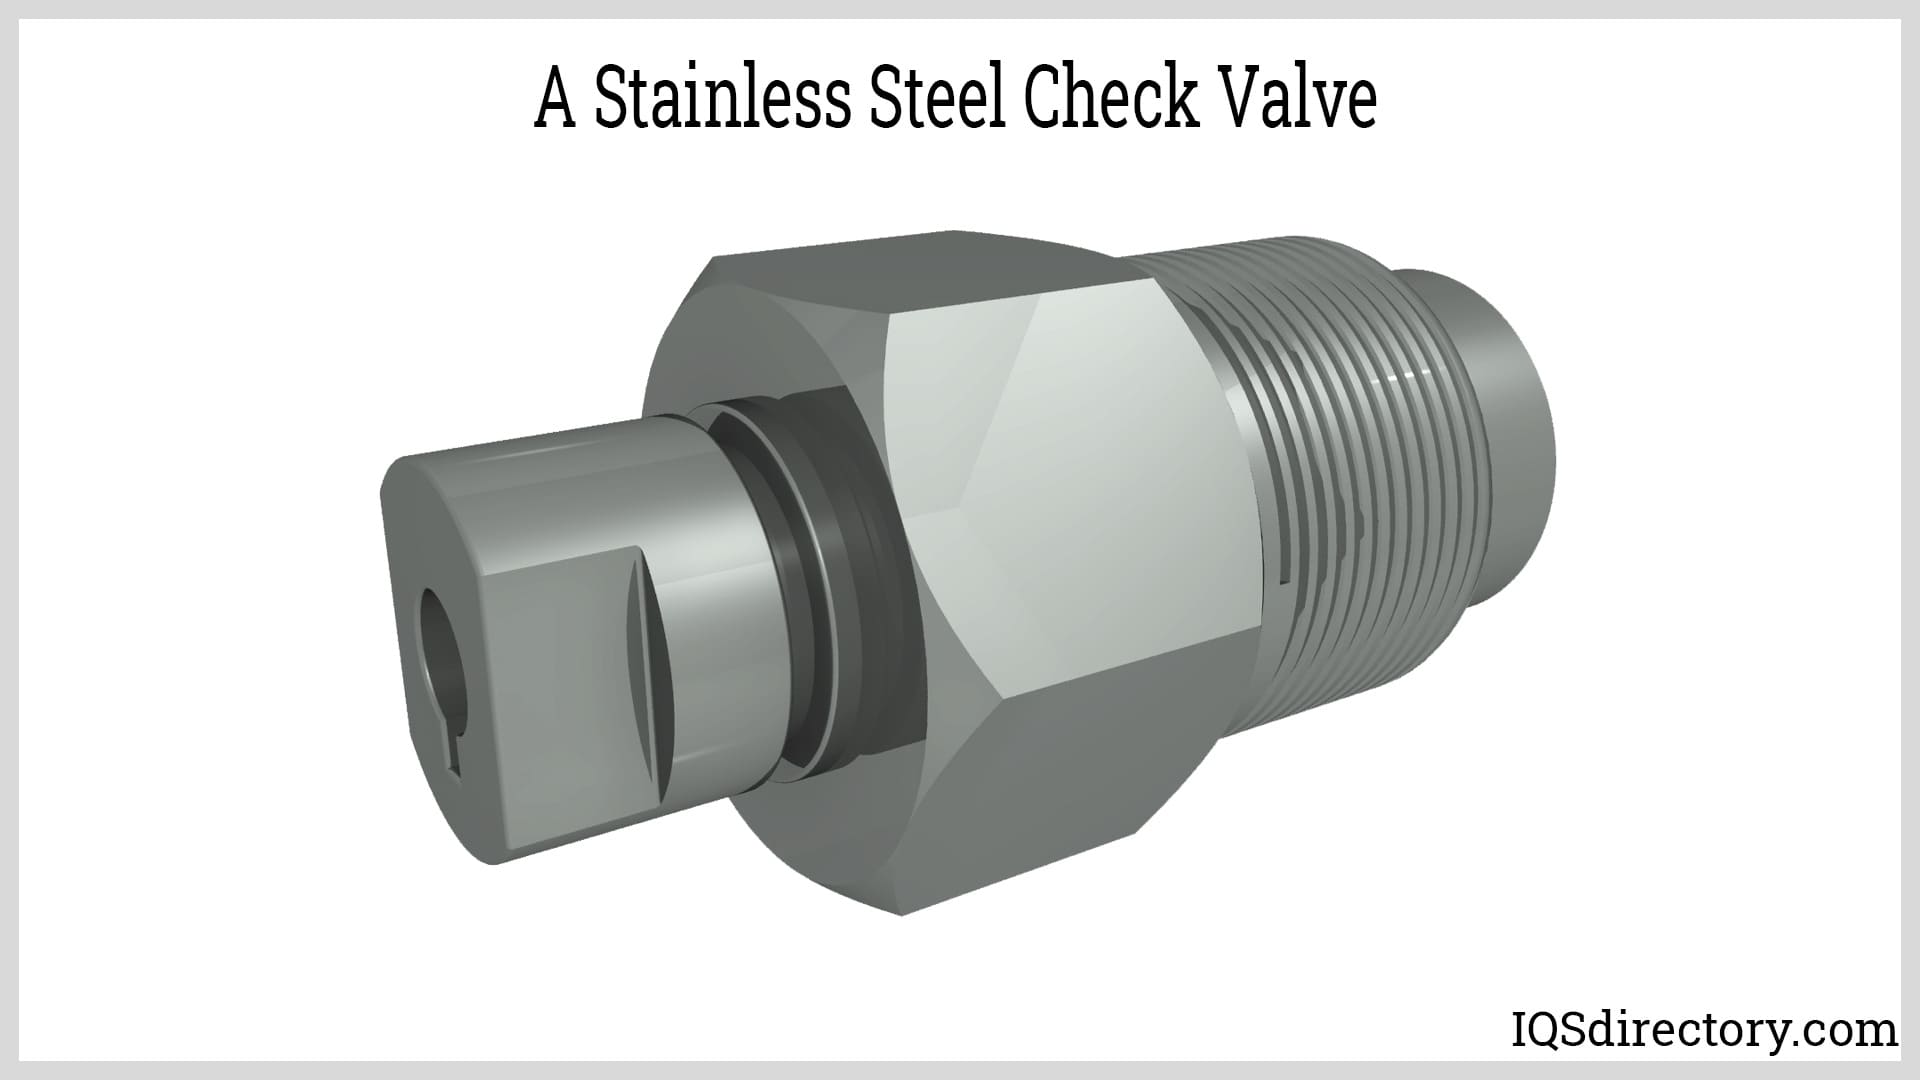 A Stainless Steel Check Valve